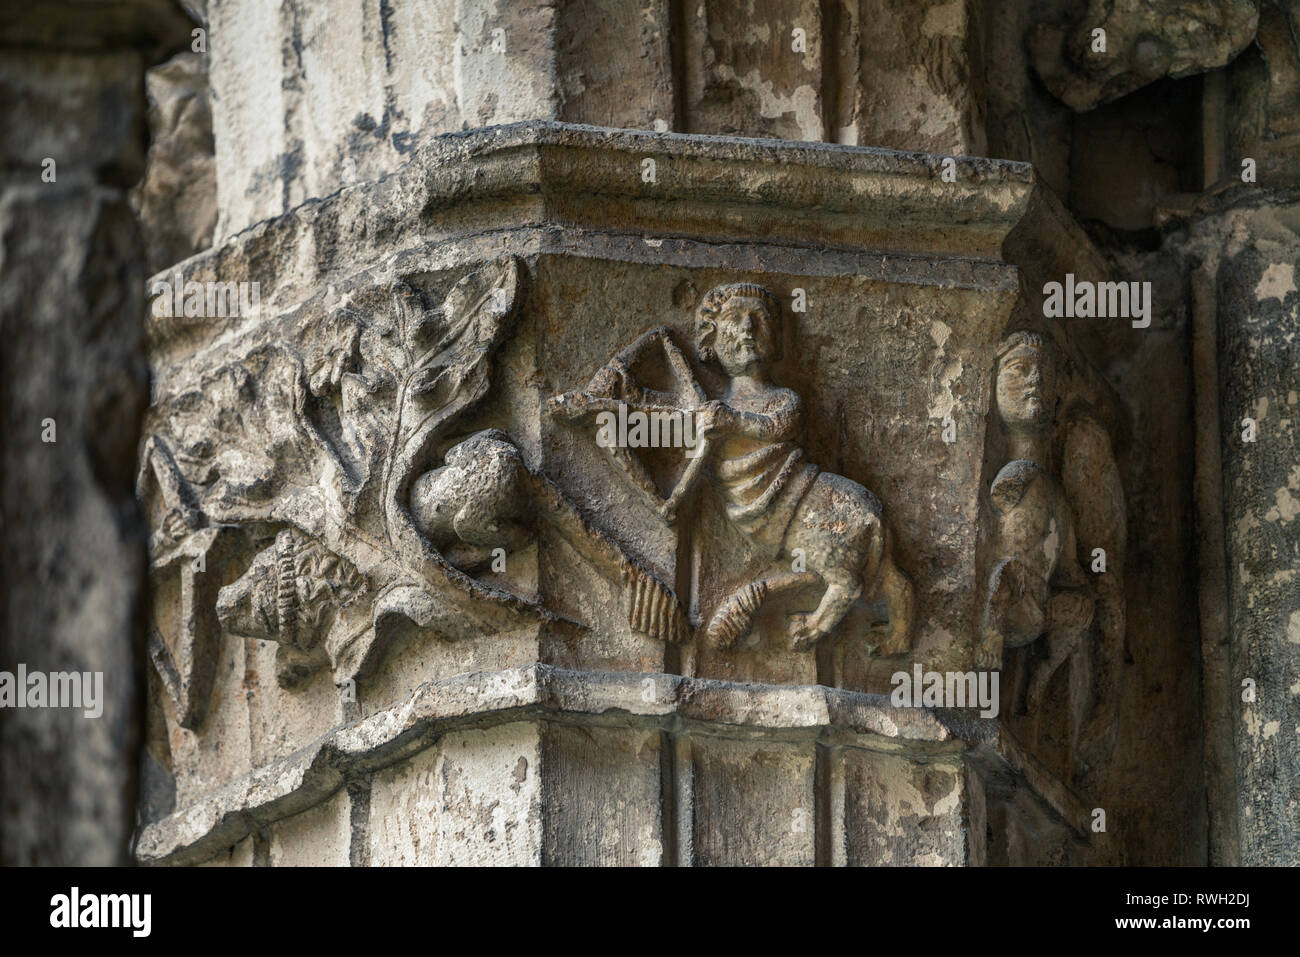 A capital from cloister of Cathedral of San Salvador in Oviedo, Asturias, Spain Stock Photo